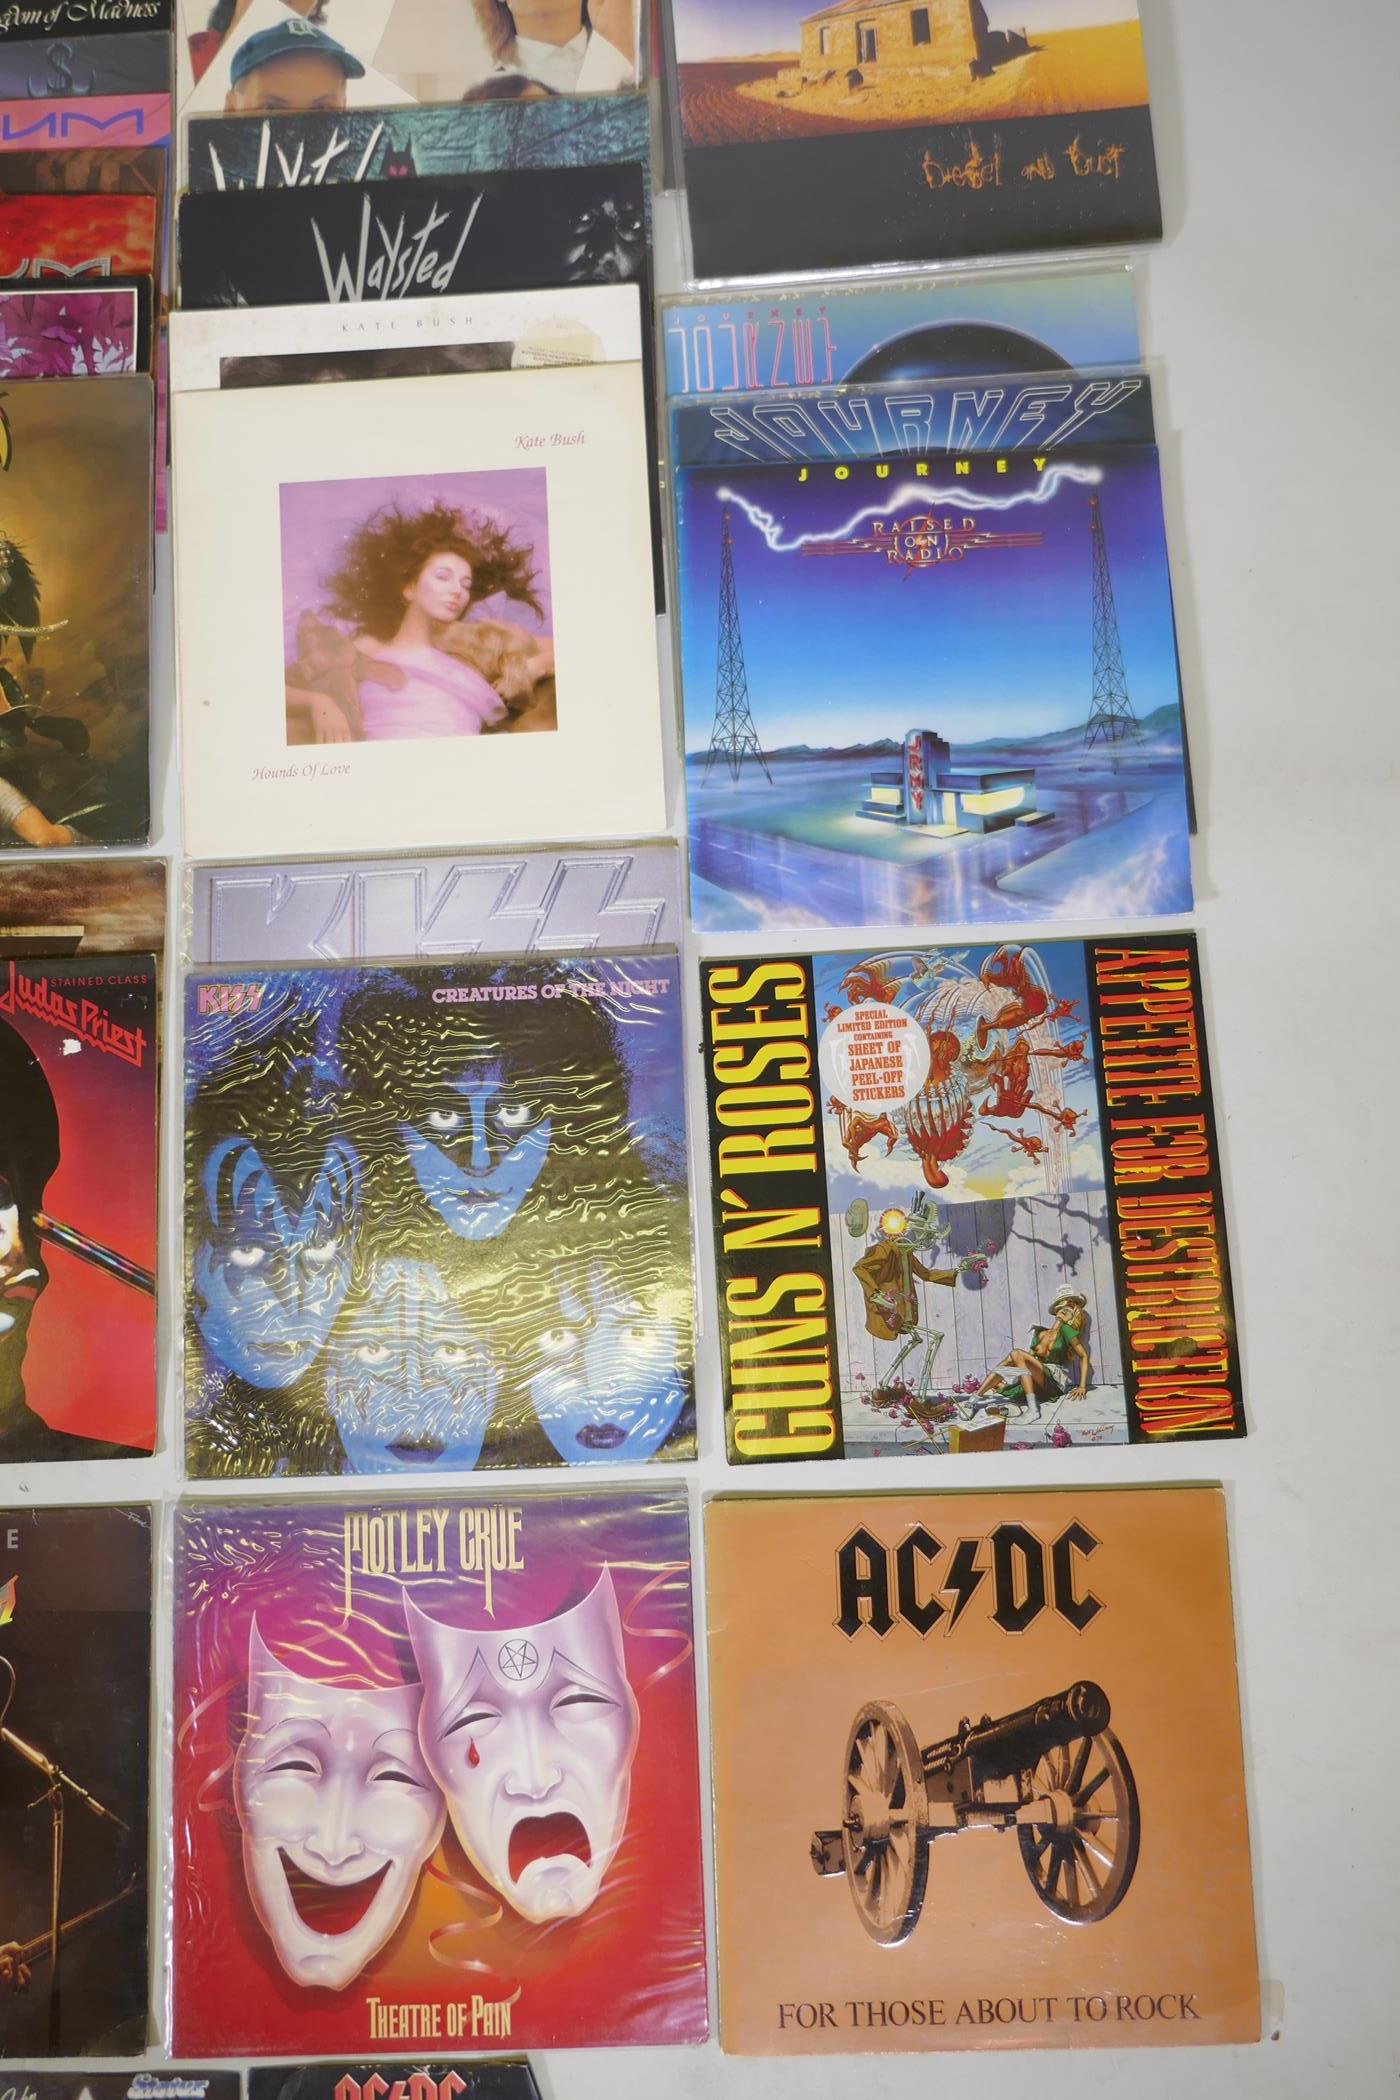 A quantity of 12" metal and rock vinyl LPs including Metallica, Meatloaf, Thin Lizzy, Motorhead, - Image 5 of 16